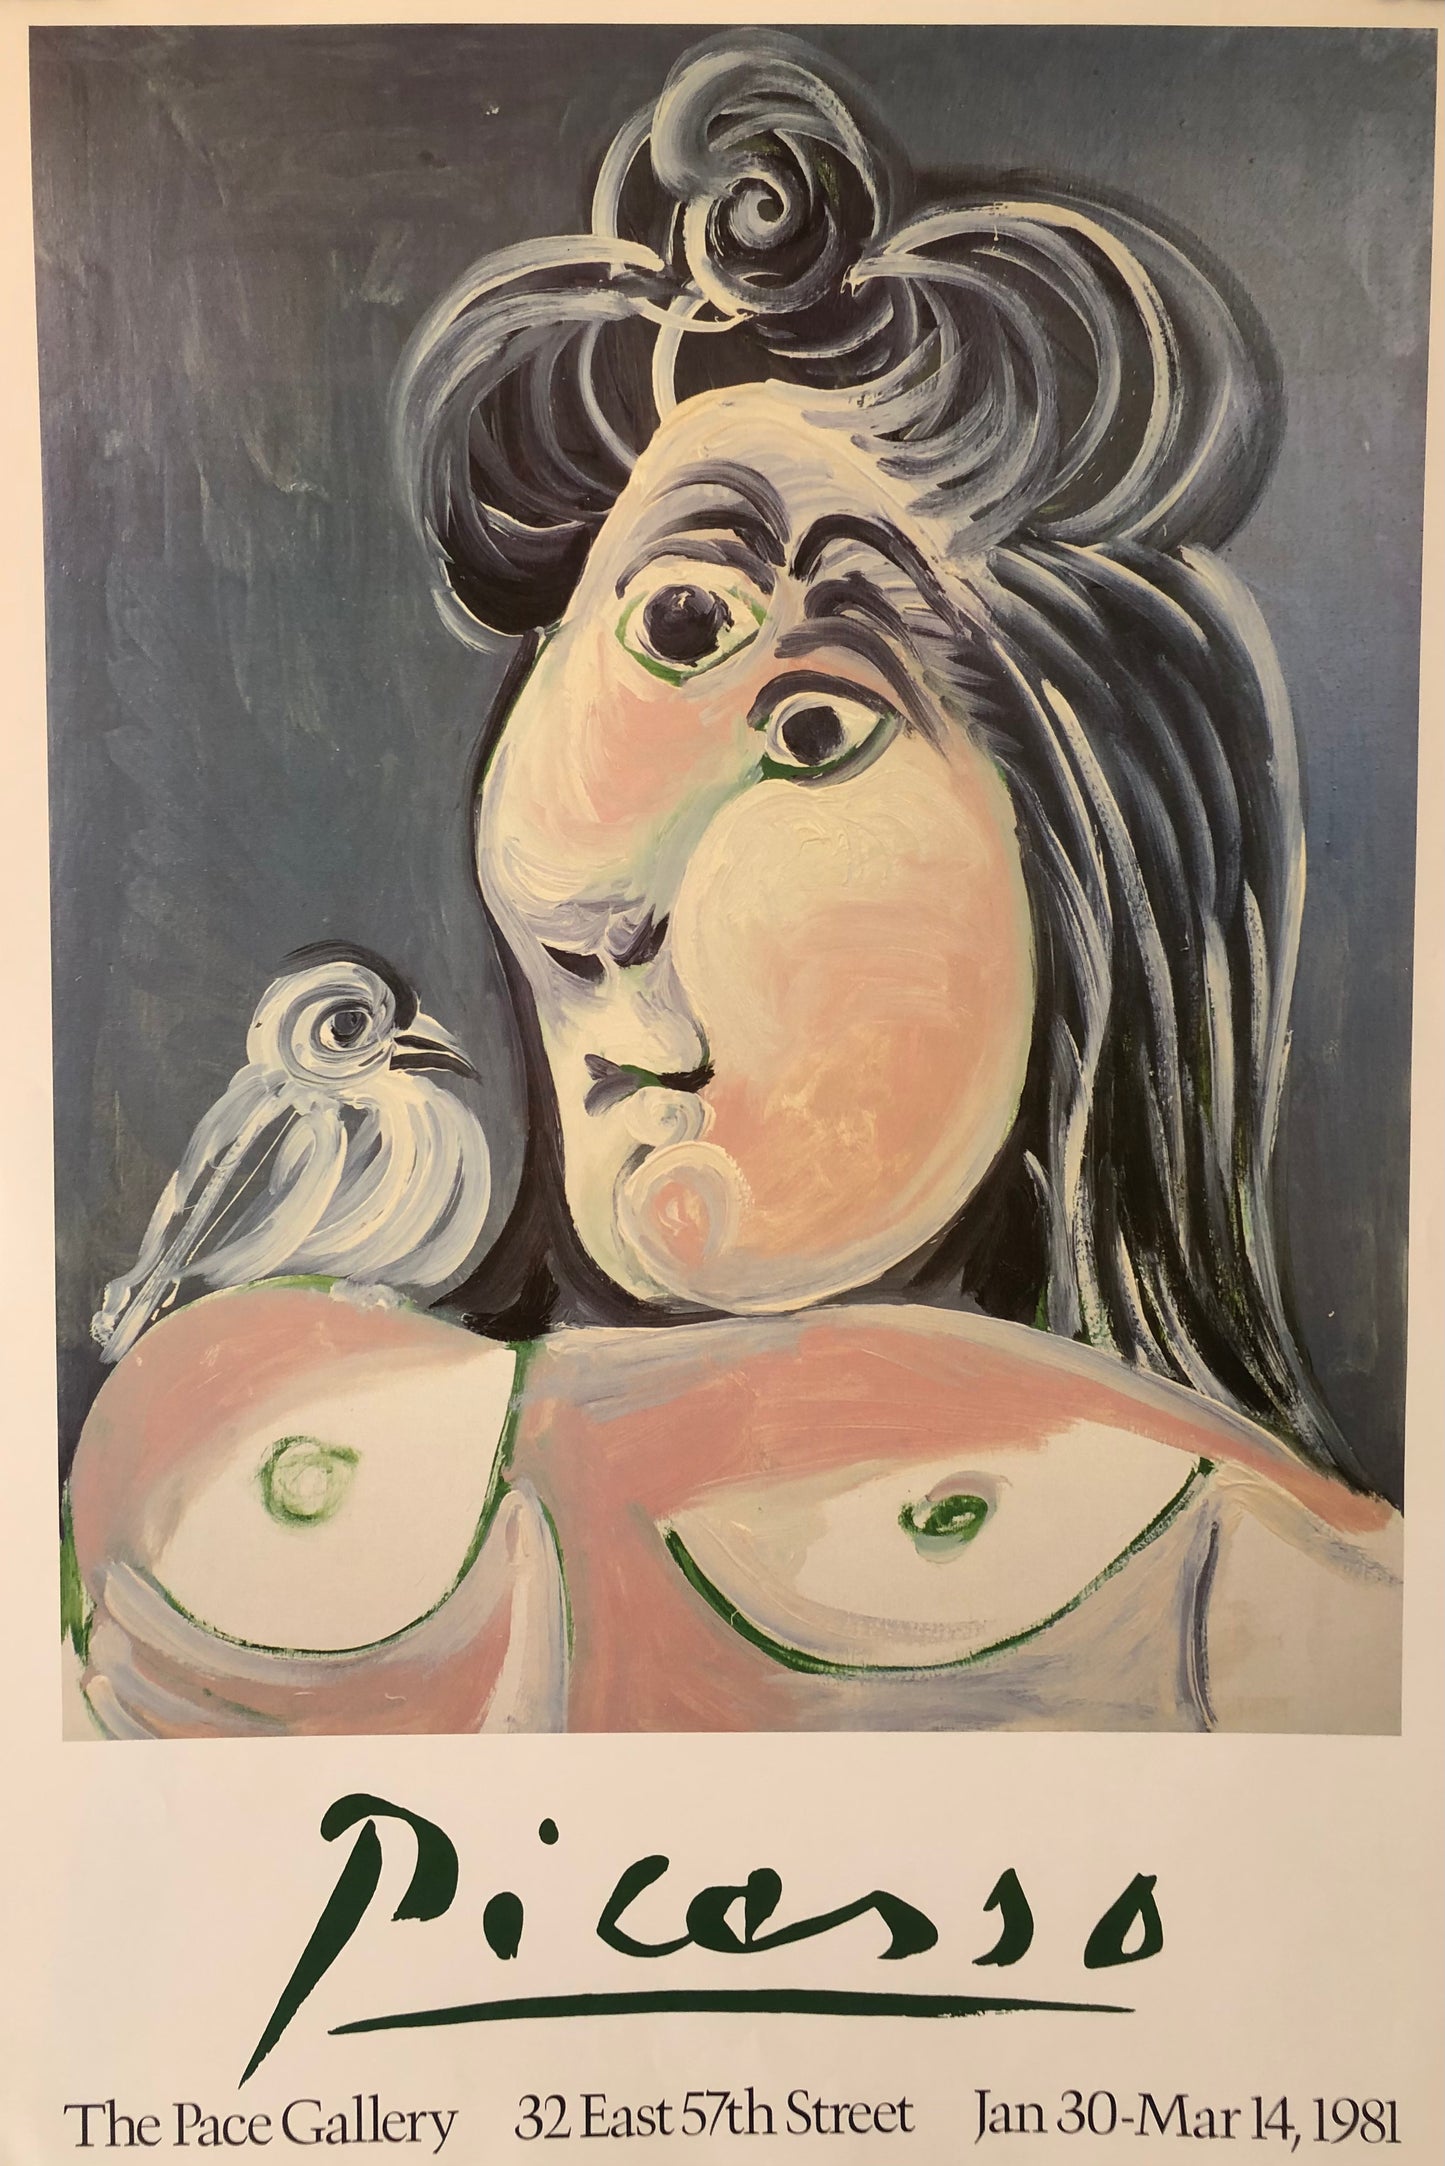 Picasso Exhibition Poster, The Pace Gallery